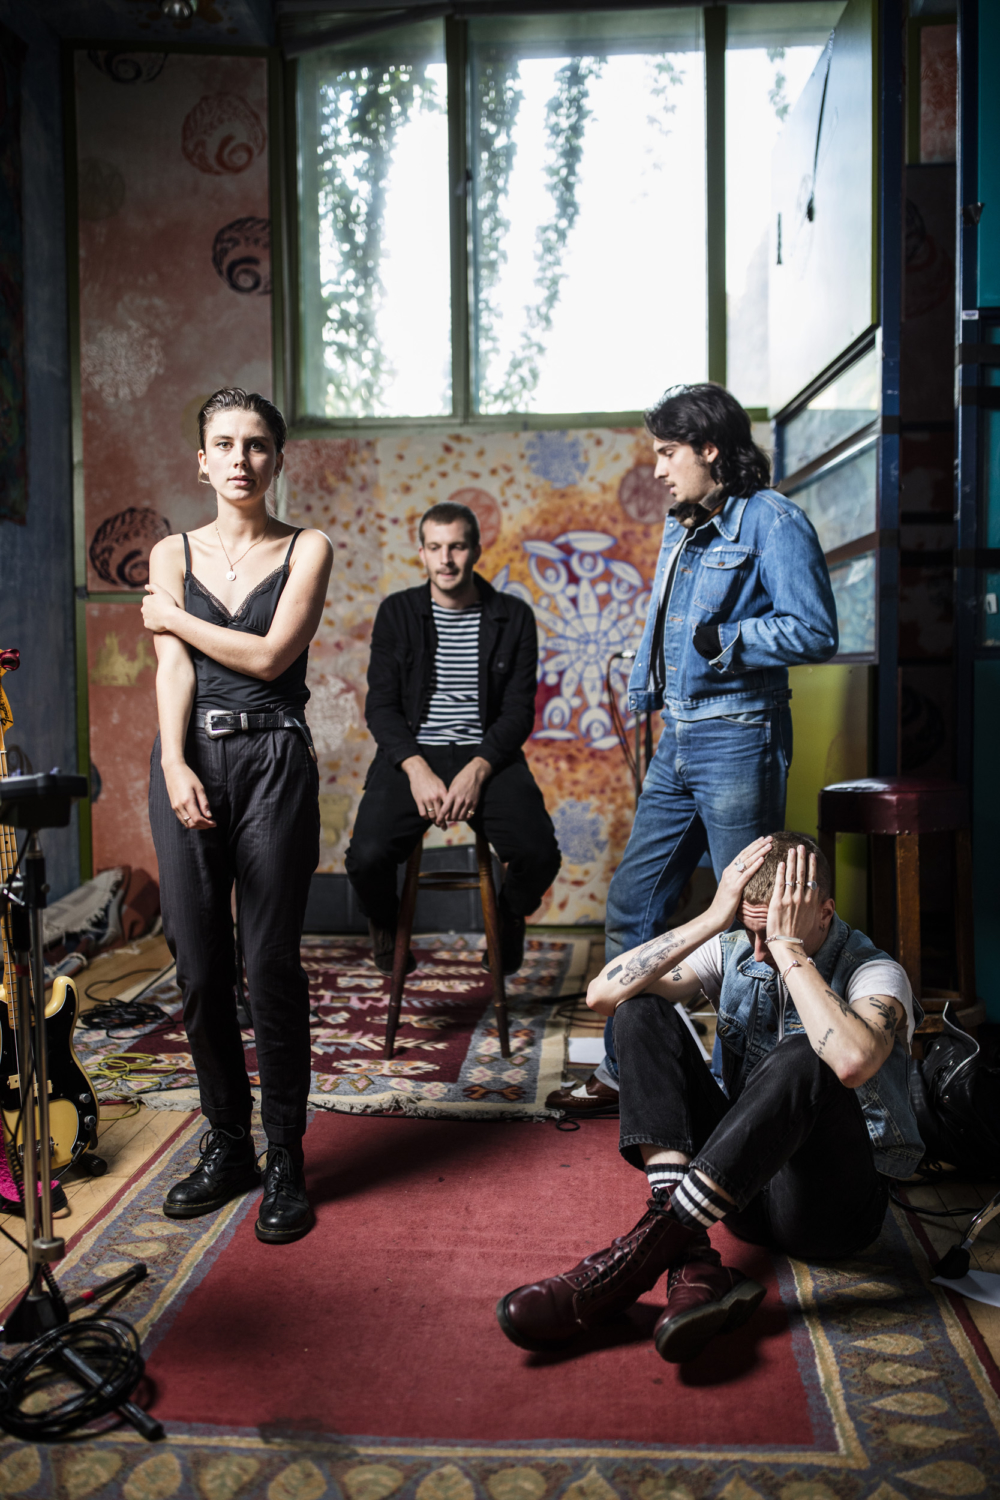 Wolf Alice, winners of the 2018 Mercury Prize, at a recording at Spotify's Strongroom Studios, London, 2017. Photograph by David Levene.